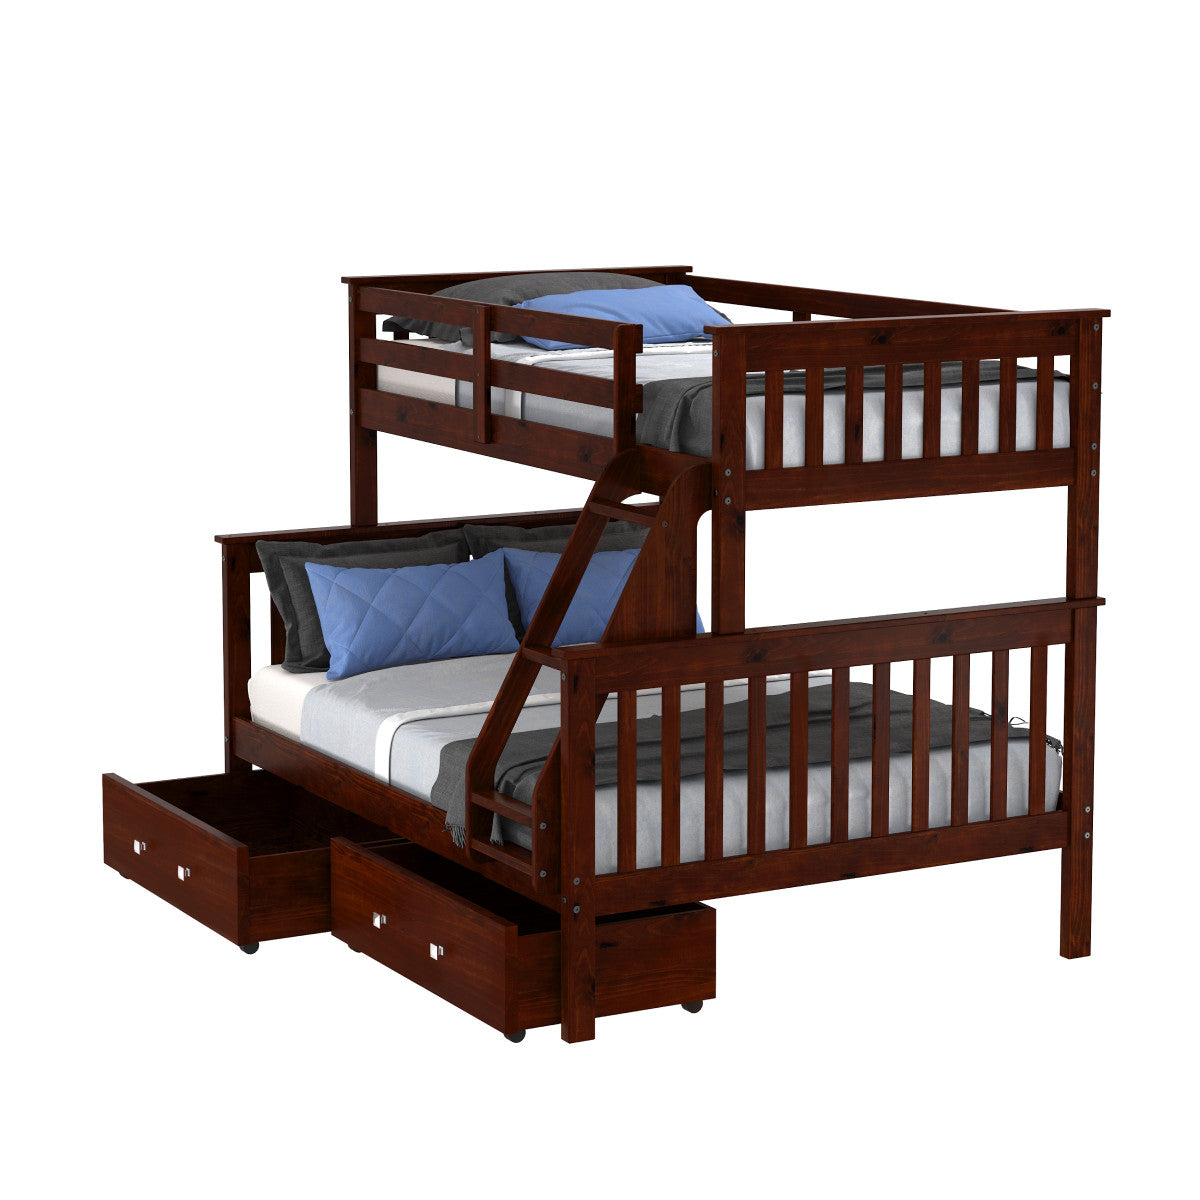 TWIN/FULL MISSION BUNK BED W/DUAL UNDER BED DRAWERS IN DARK CAPPUCCINO FINISH